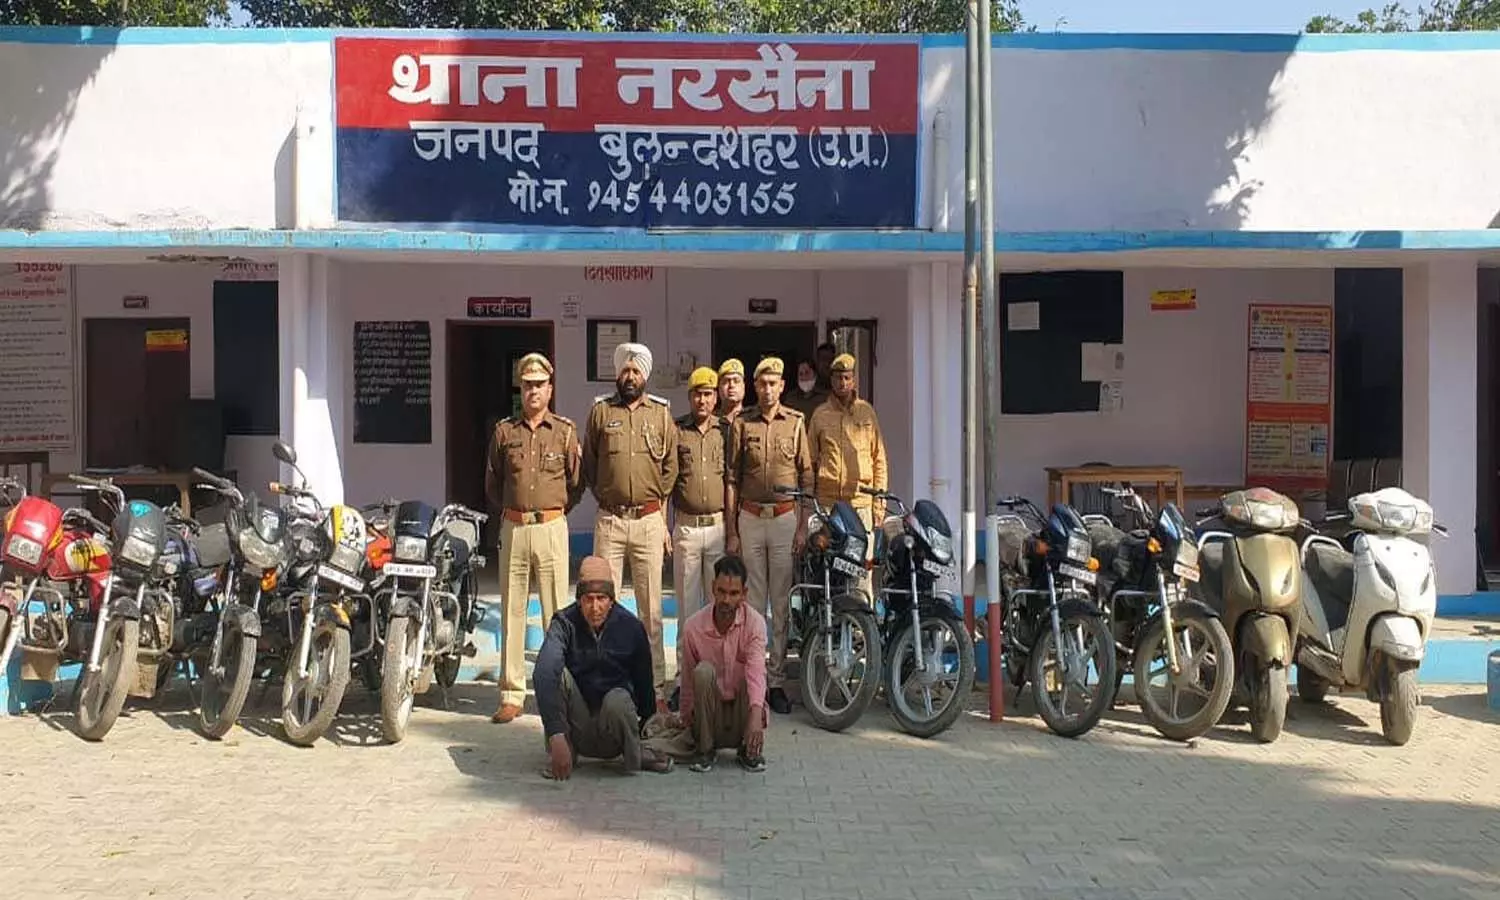 Bulandshahr Crime News: Revealed vehicle thief gang, check here if your car is stolen